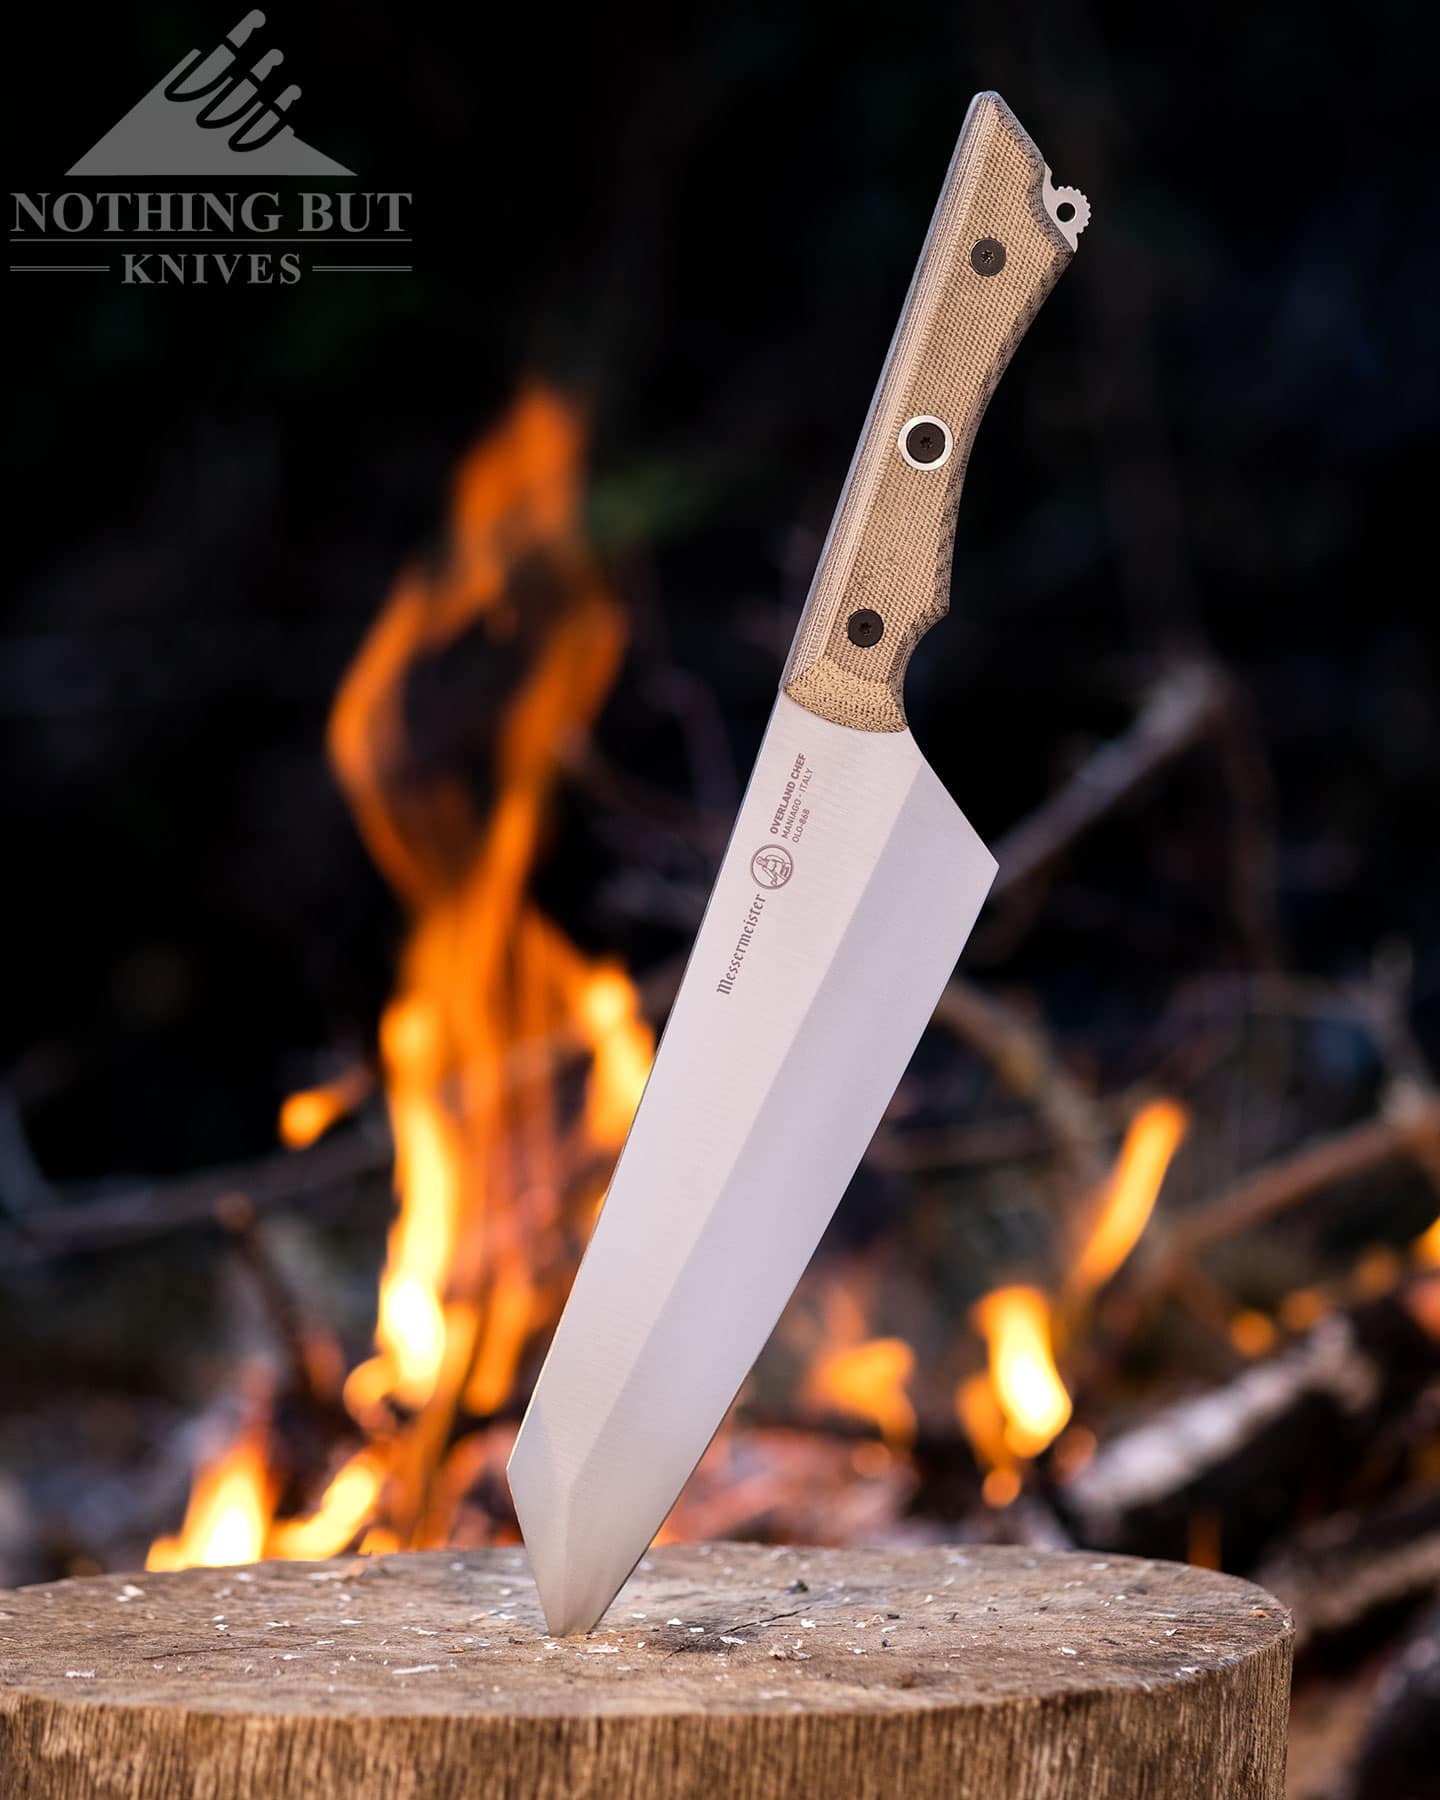 The Messermeister Overland is one of our top pics for camp cooking on a grill or on a campfire.